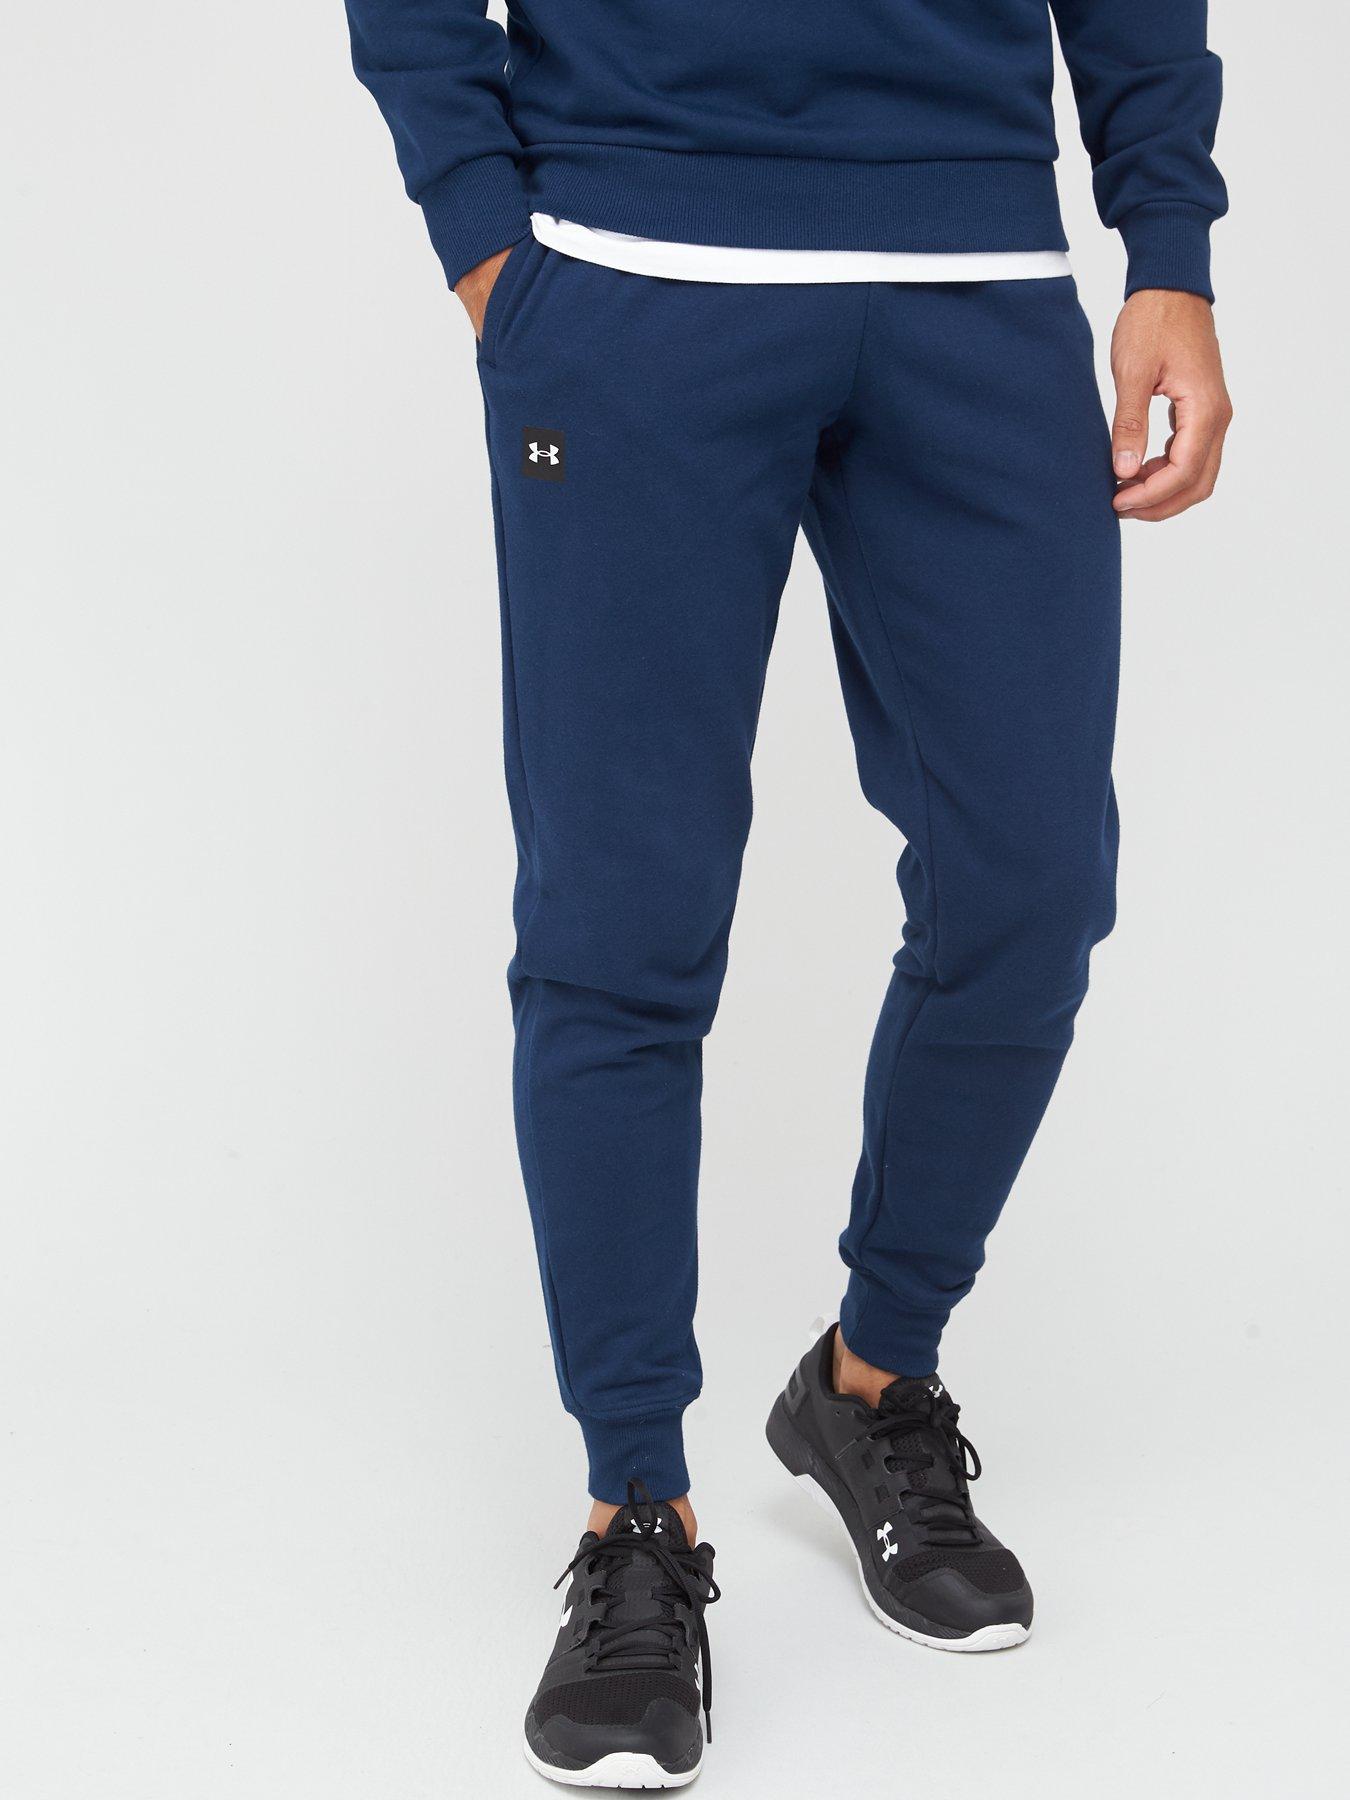 Navy Blue S Kappa tracksuit and joggers MEN FASHION Trousers Sports discount 65% 